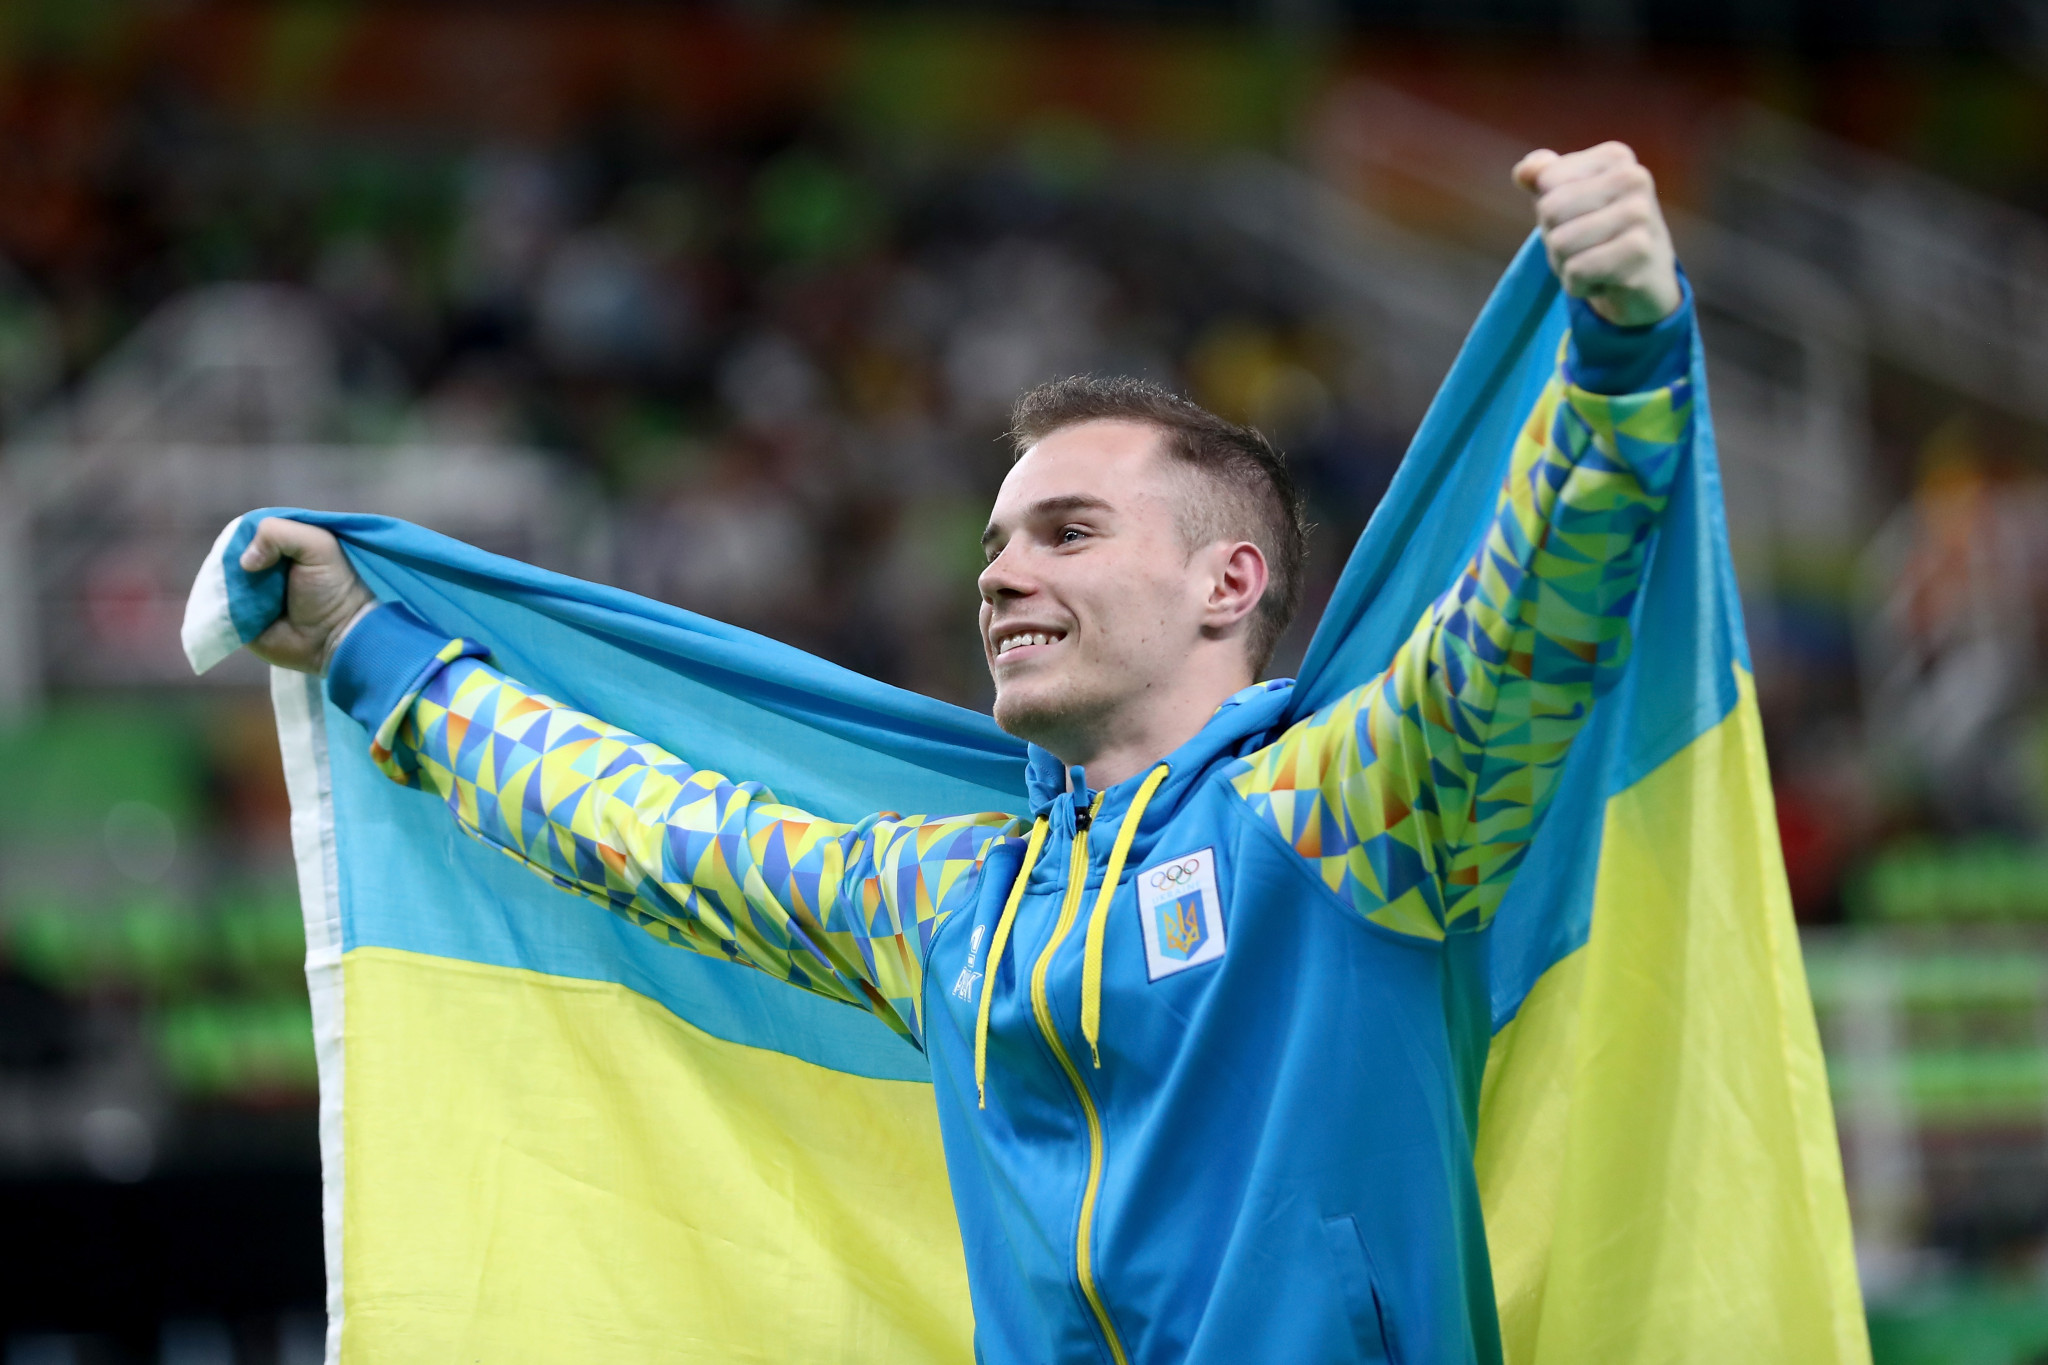 Oleg Verniaiev earned Olympic gold in the parallel bars at Rio 2016 ©Getty Images